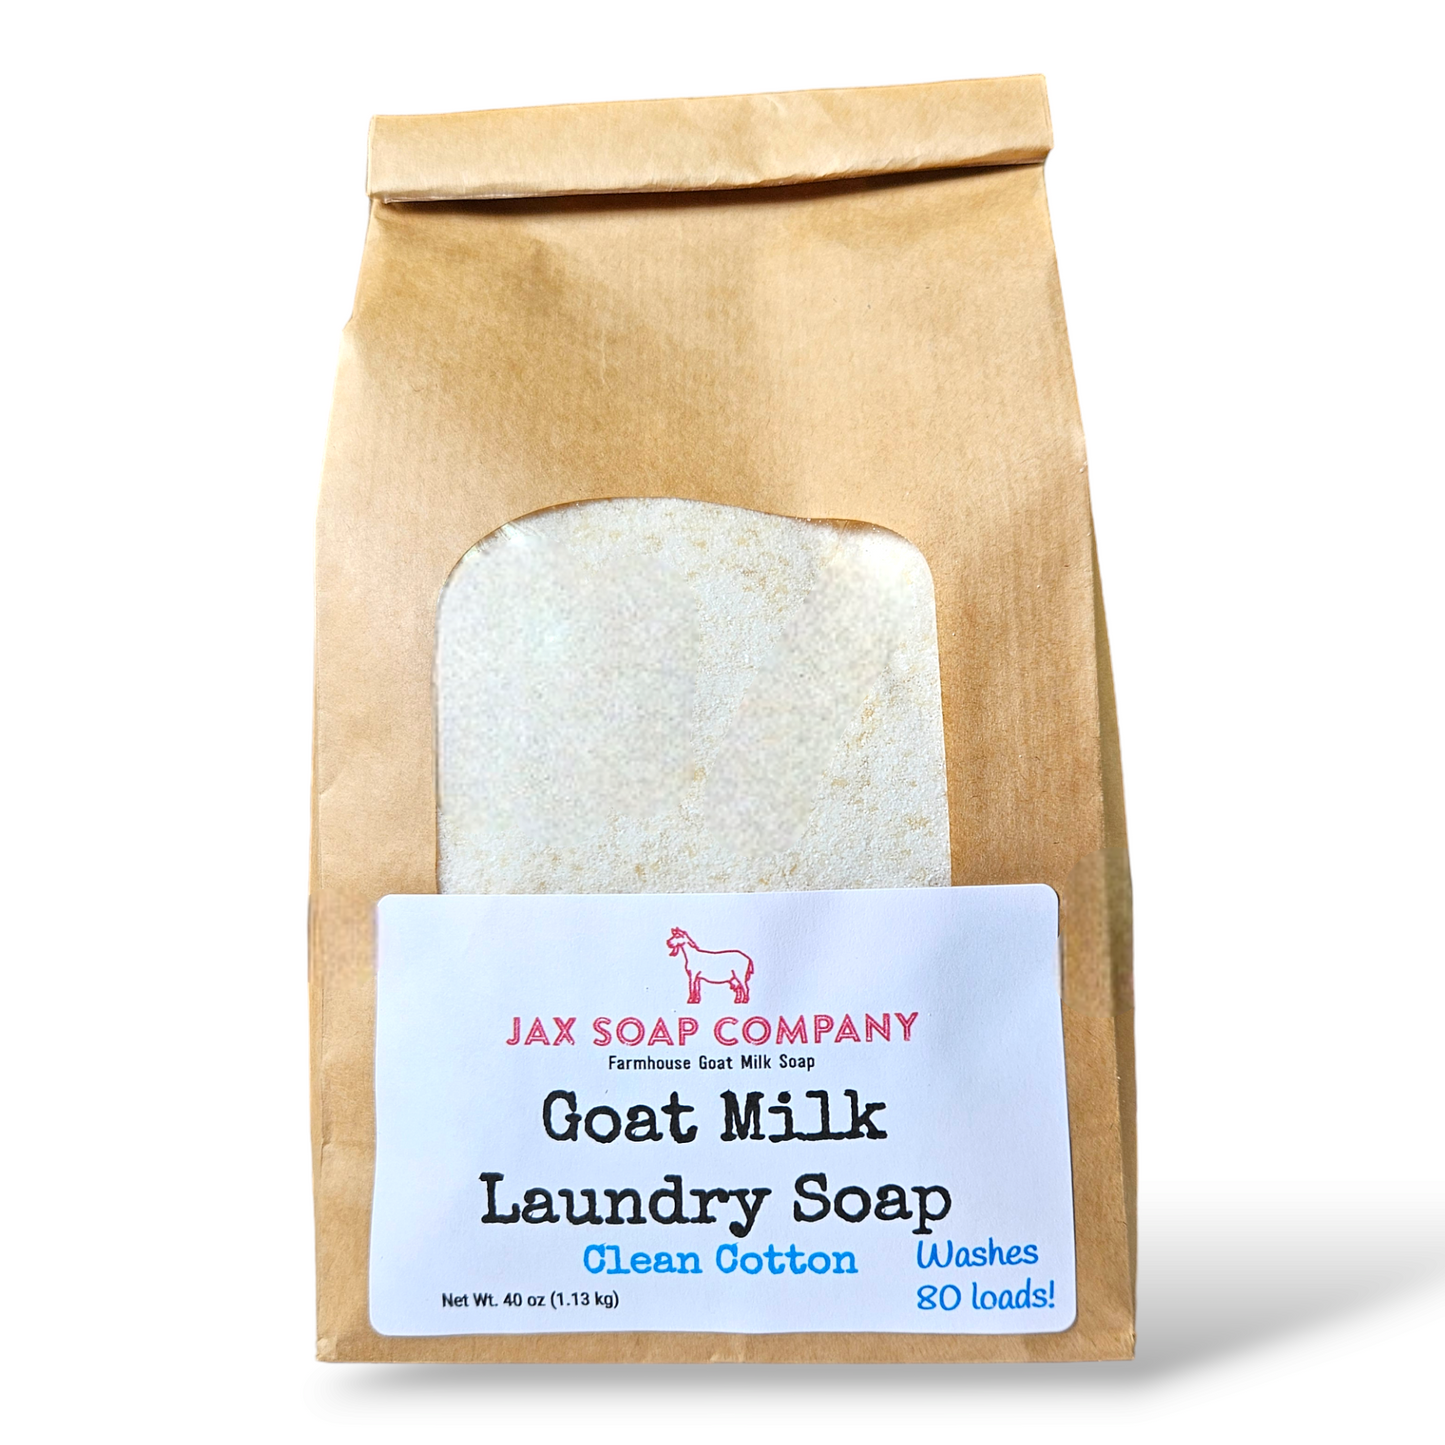 Goat Milk Laundry Soap Refill, 80 loads  Jax Soap Company Clean Cotton With 1 tablespoon scoop 